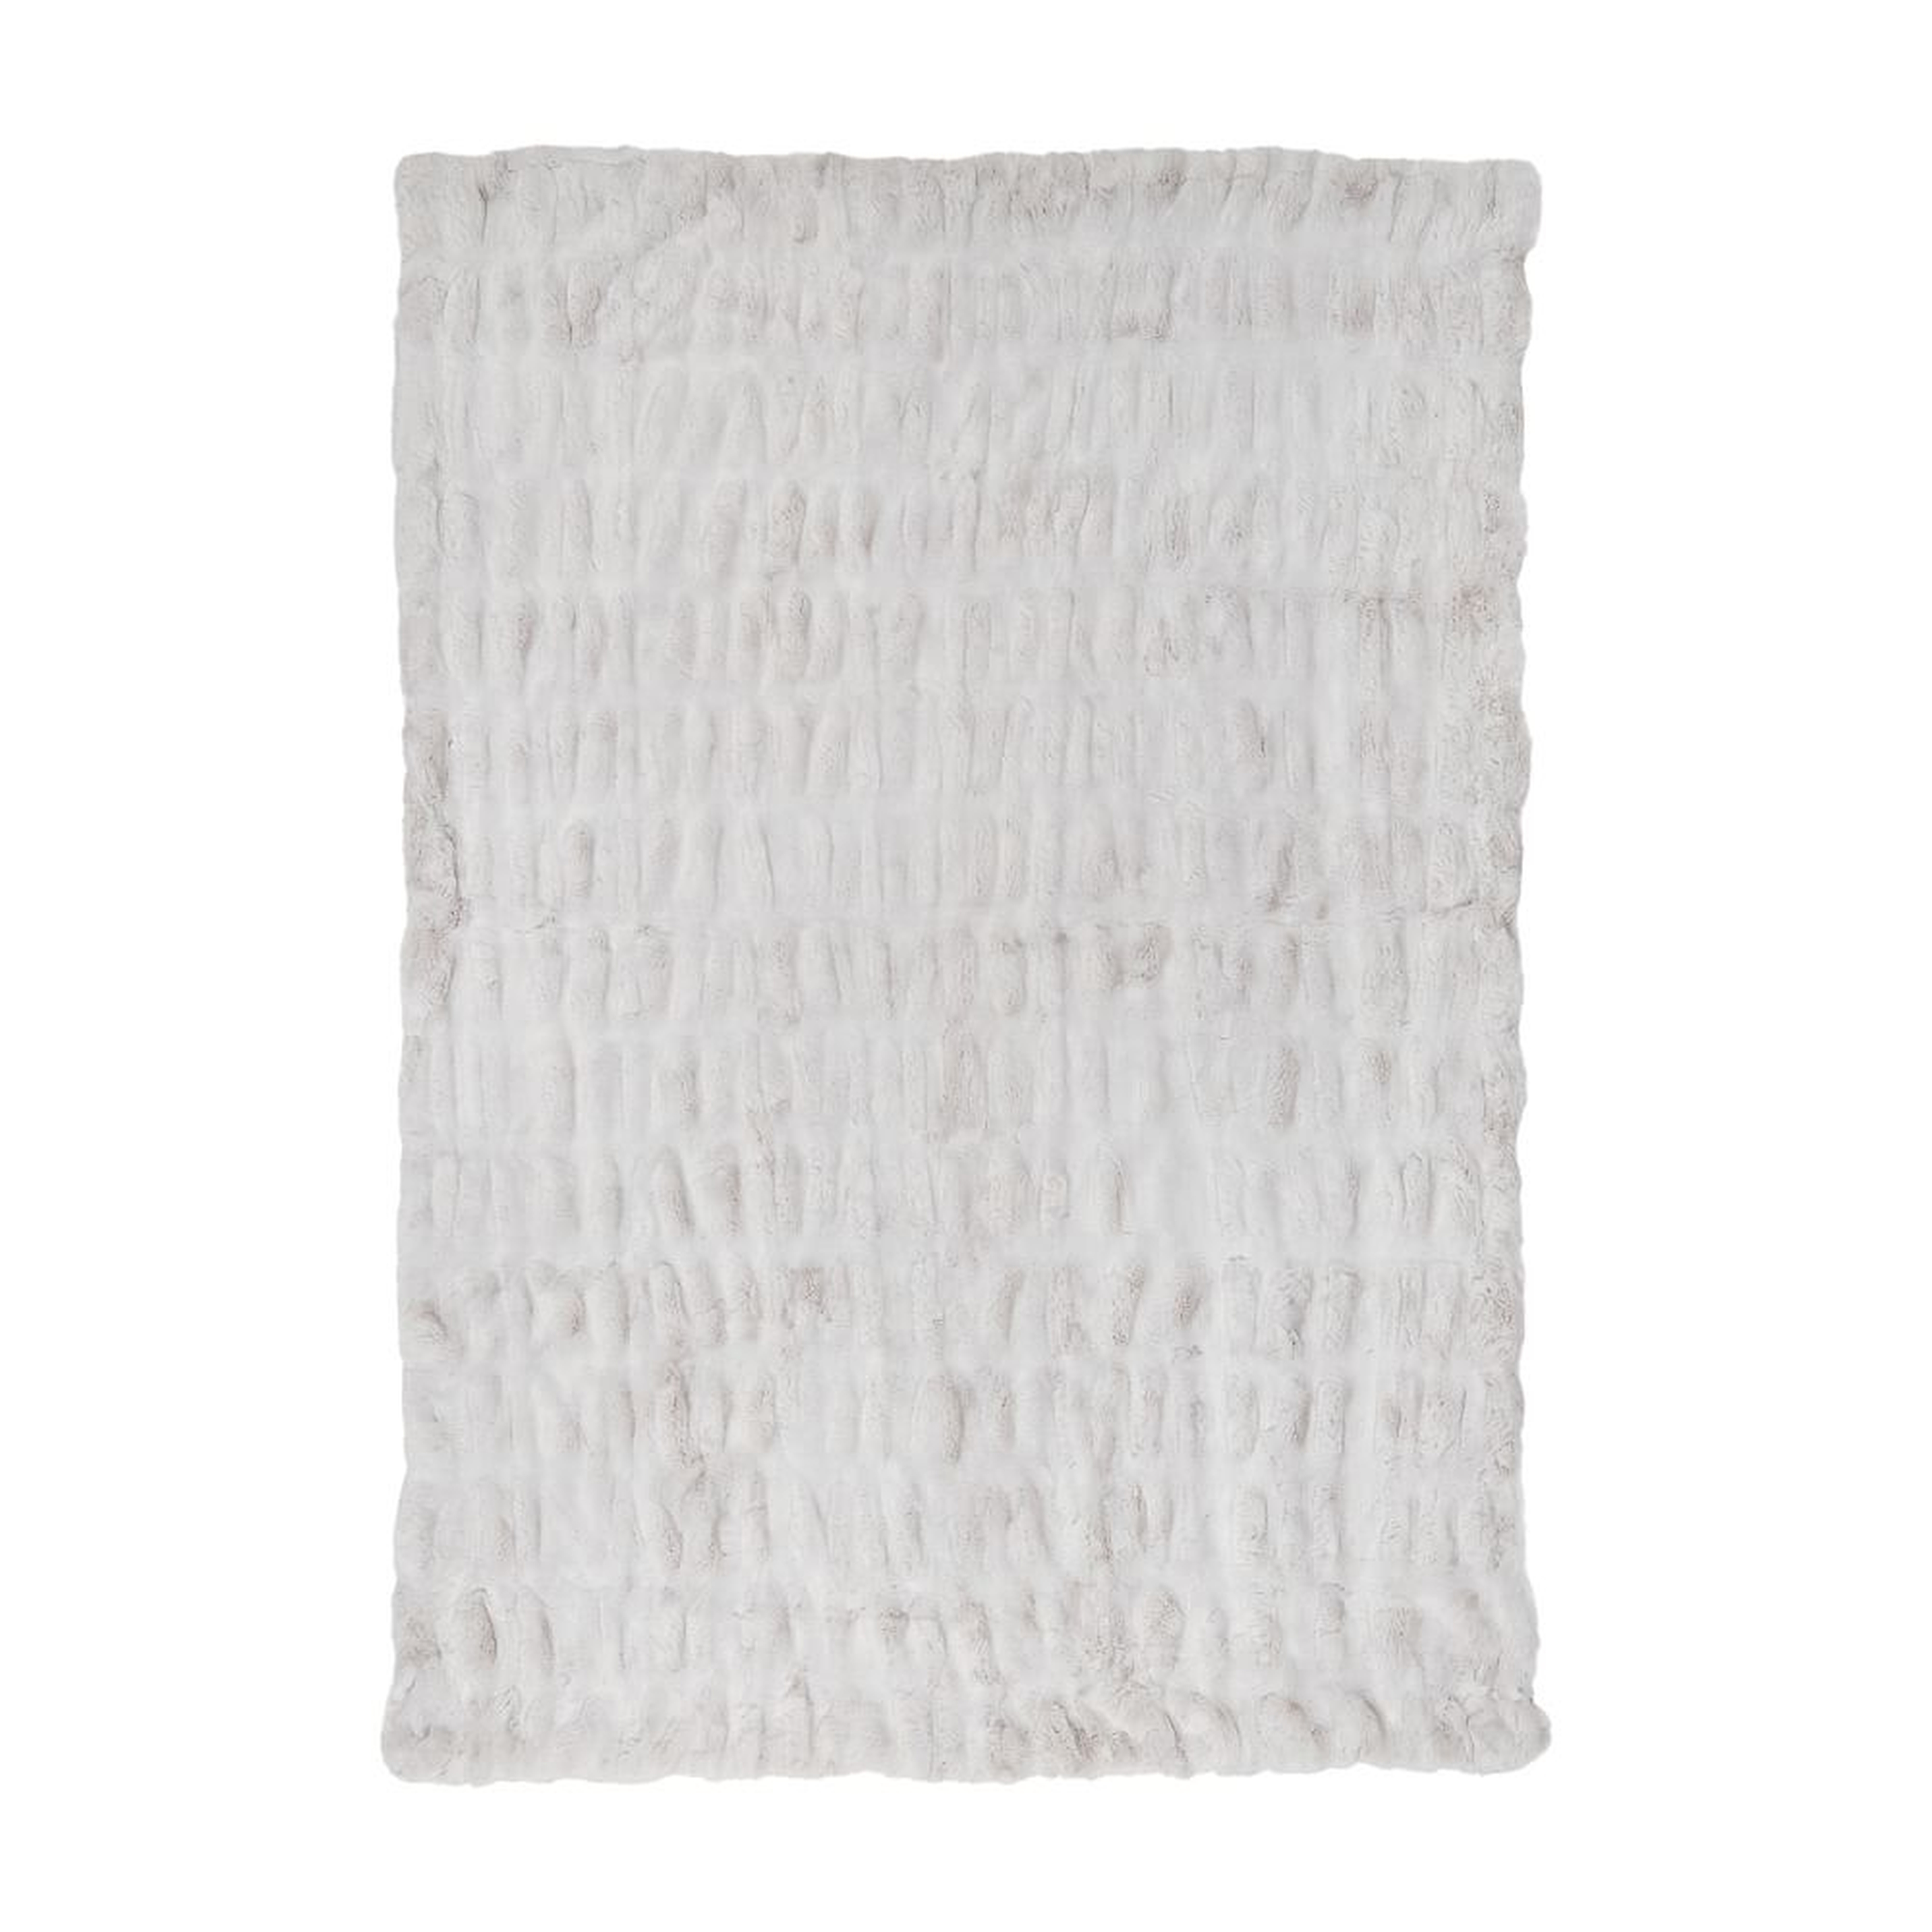 Ruched Recycled Faux-Fur Throw, 45x60, Pale Grey - Pottery Barn Teen